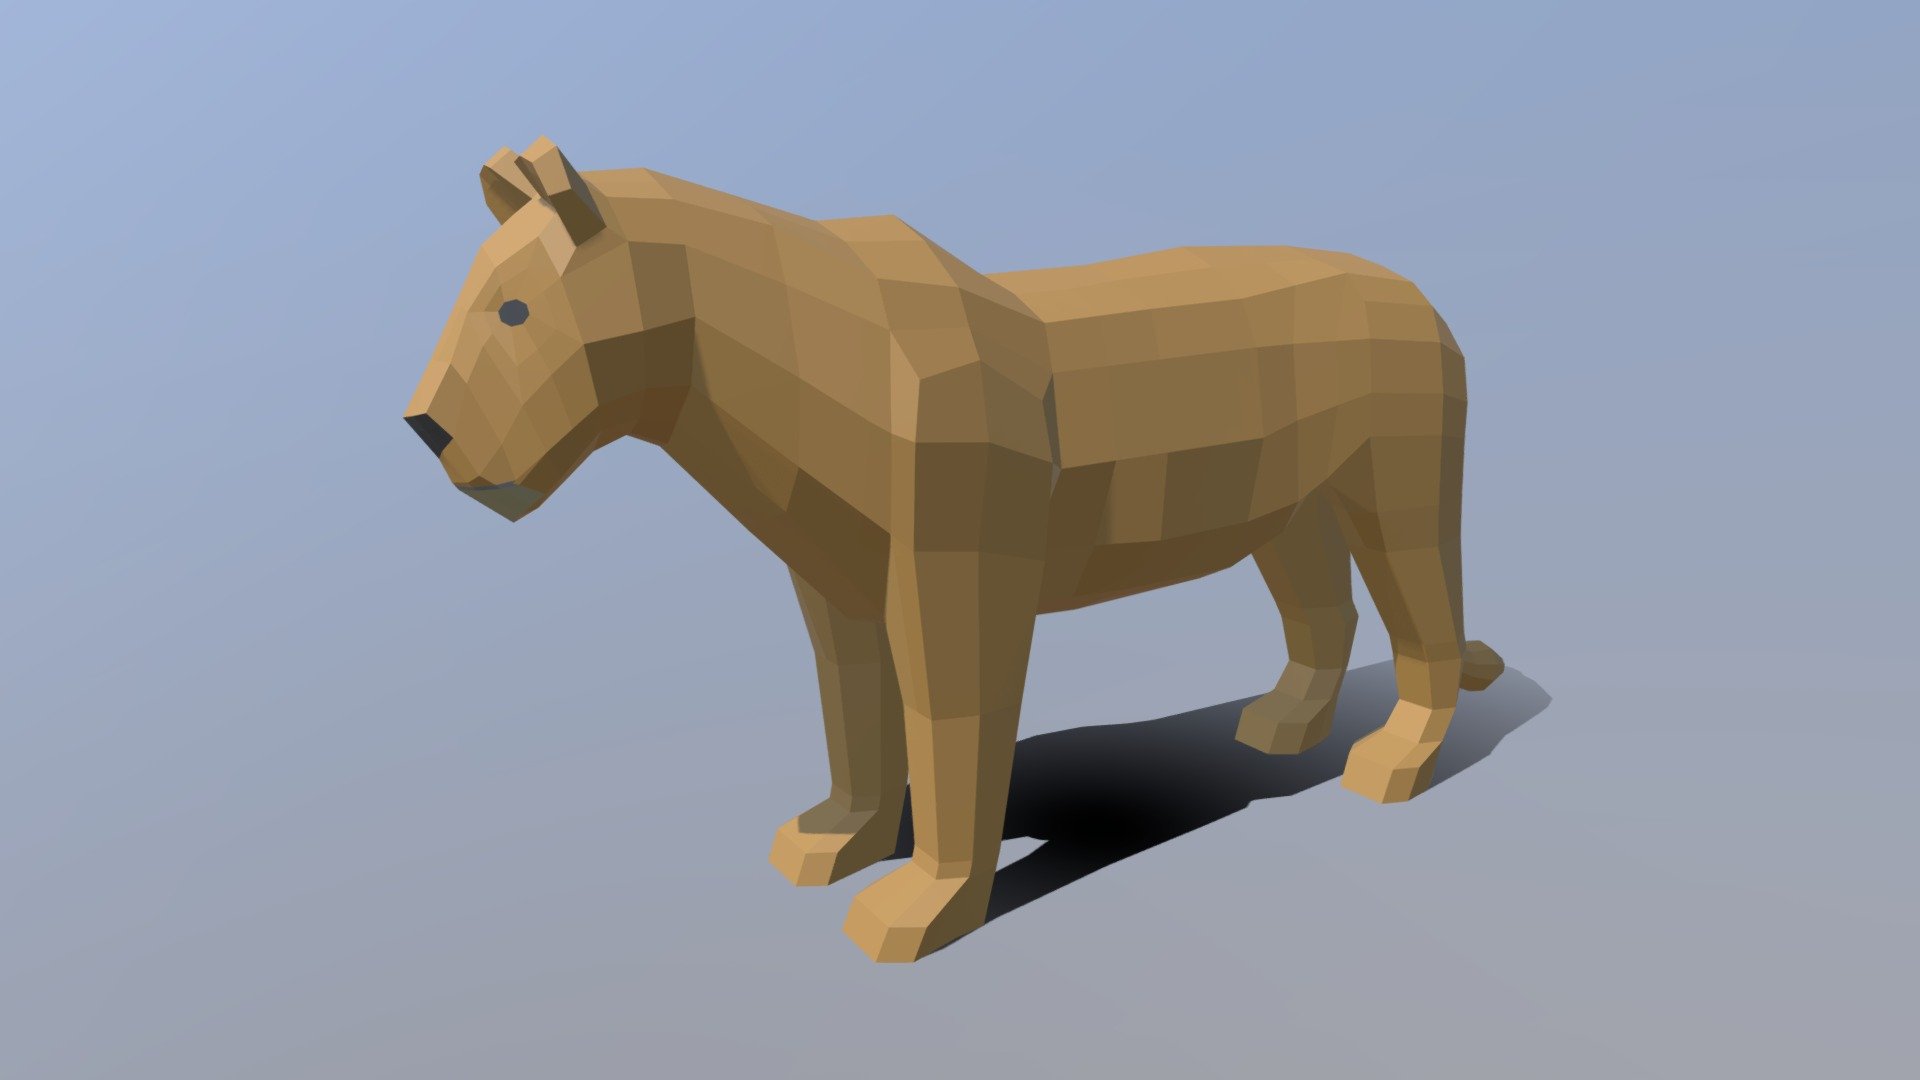 This is a low poly 3d model of a female lion. The low poly lion was modeled and prepared for low-poly style renderings, background, general CG visualization.

The 3d lion model is presented as a mesh with quads only.

Verts : 762 Faces: 760

Simple diffuse colors.

No ring, maps and no UVW mapping is available.

The original file was created in blender. You will receive a 3DS, OBJ, FBX, blend, DAE, STL.

All preview images were rendered with Blender Cycles. Product is ready to render out-of-the-box. Please note that the lights, cameras, and background is only included in the .blend file. The model is clean and alone in the other provided files, centered at origin and has real-world scale 3d model